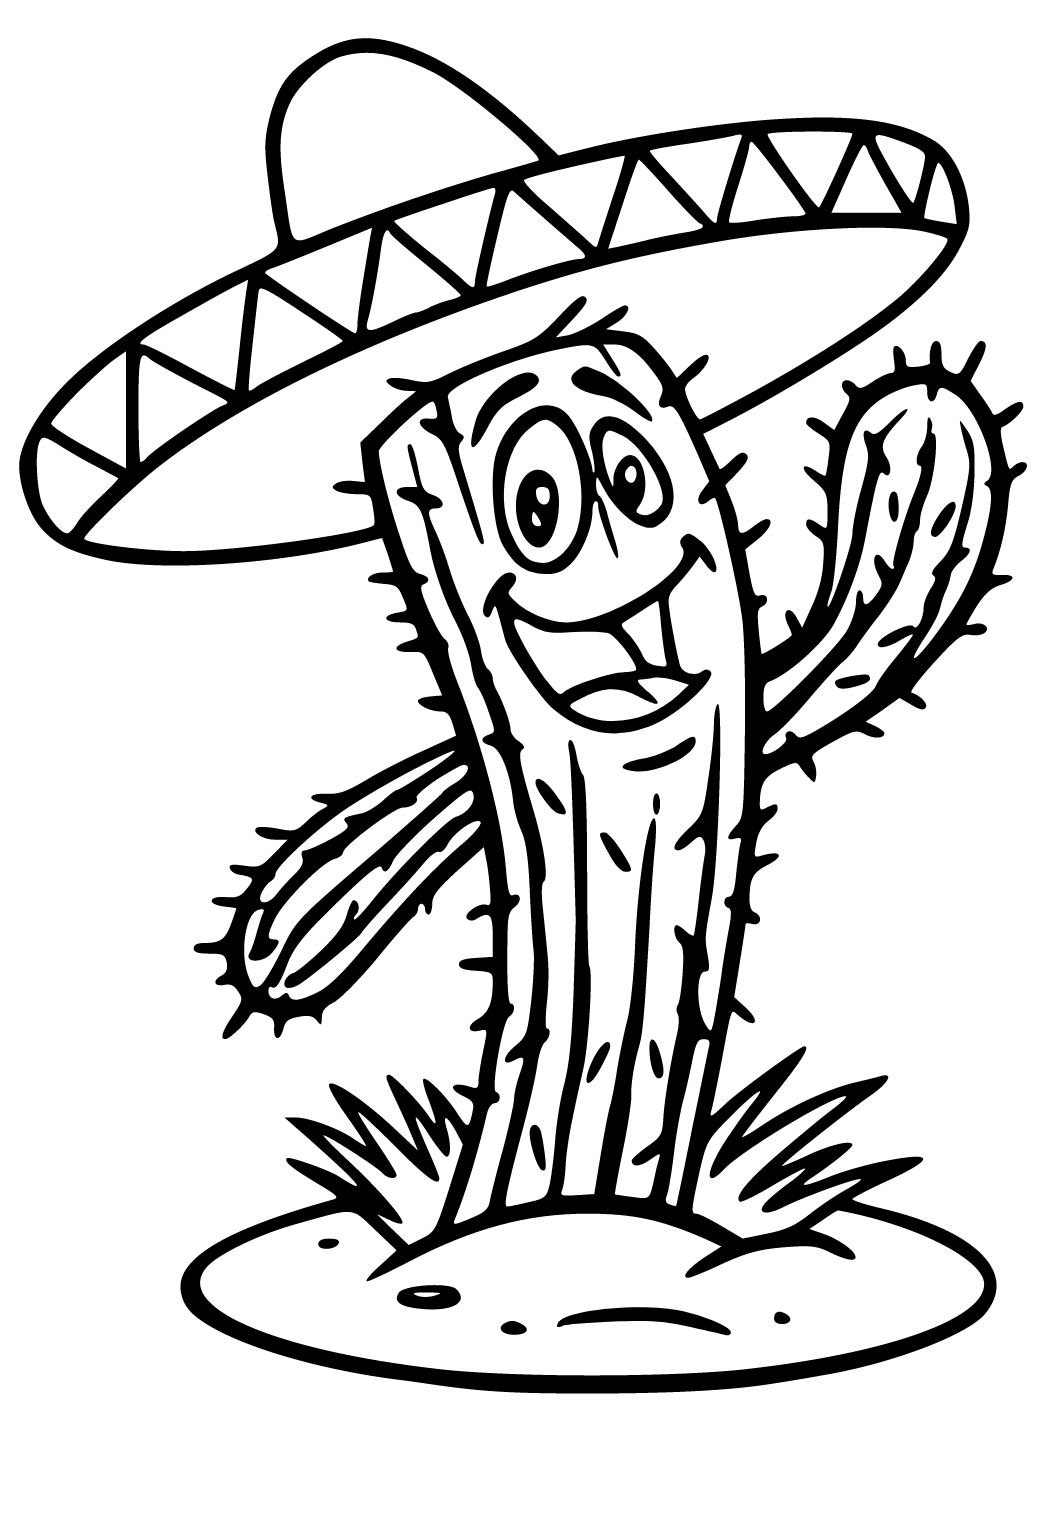 Free printable cinco de mayo cactus coloring page for adults and kids